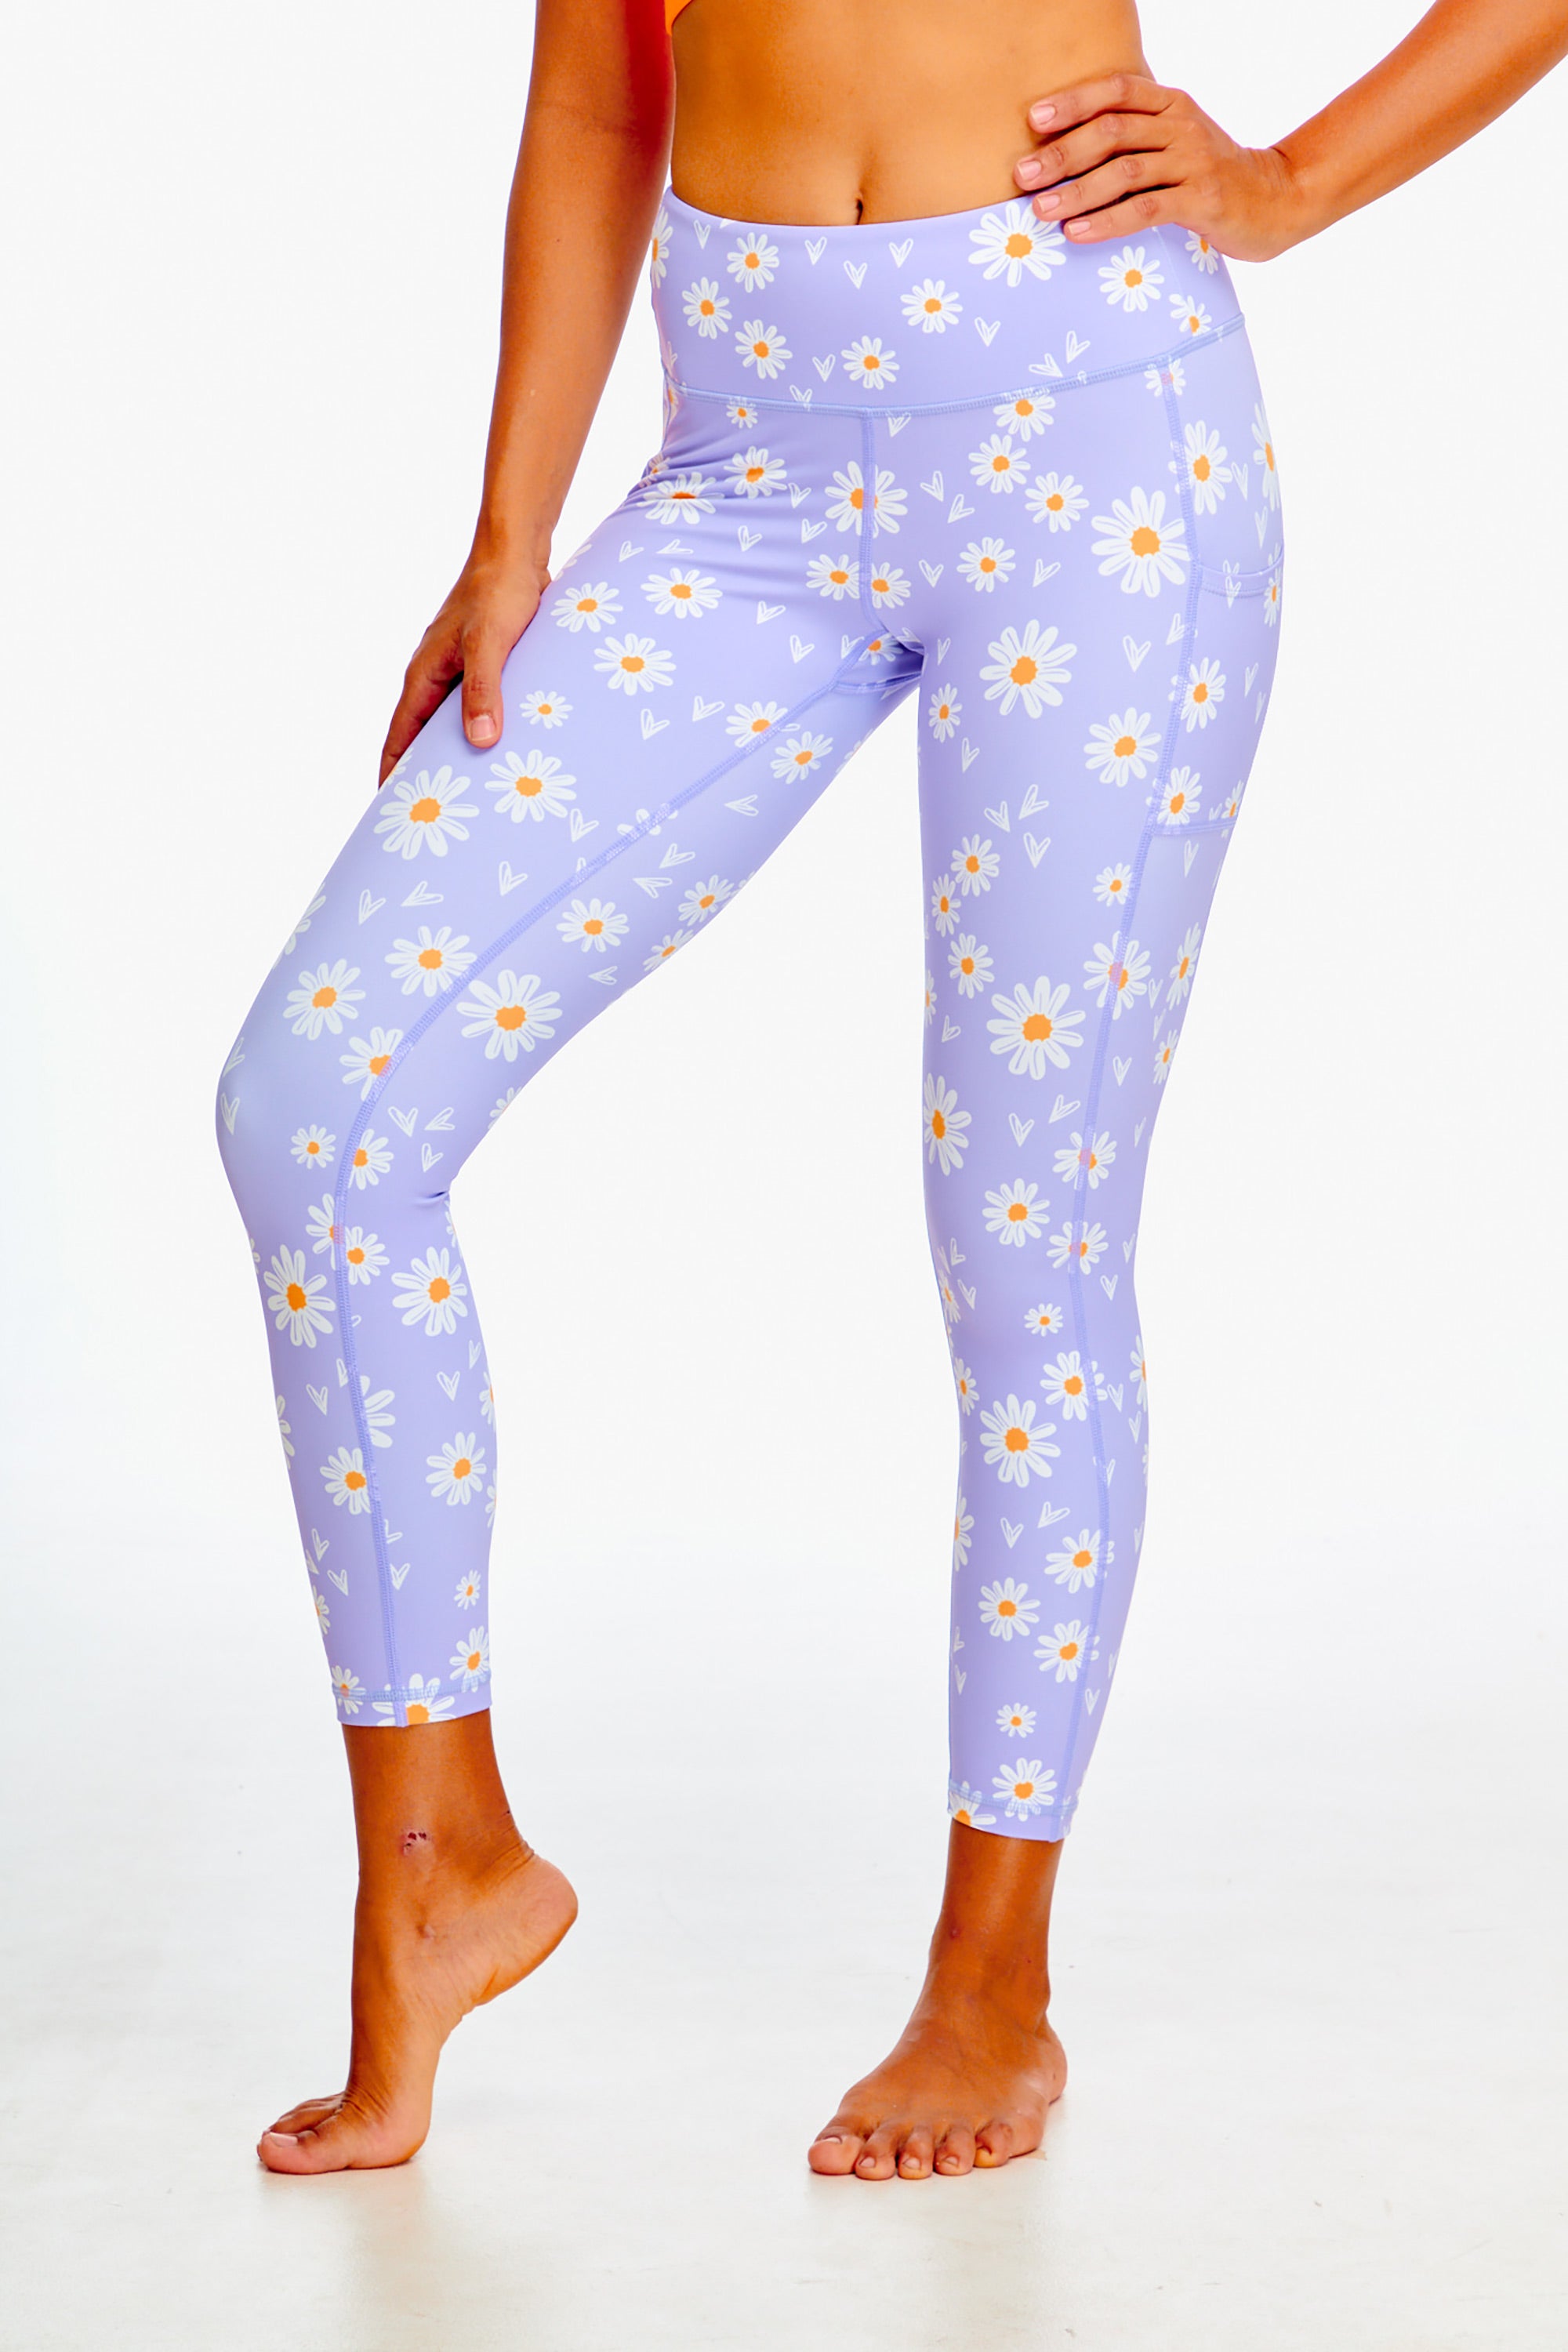 Where can I get girls' leggings at a reasonable wholesale price? - Quora